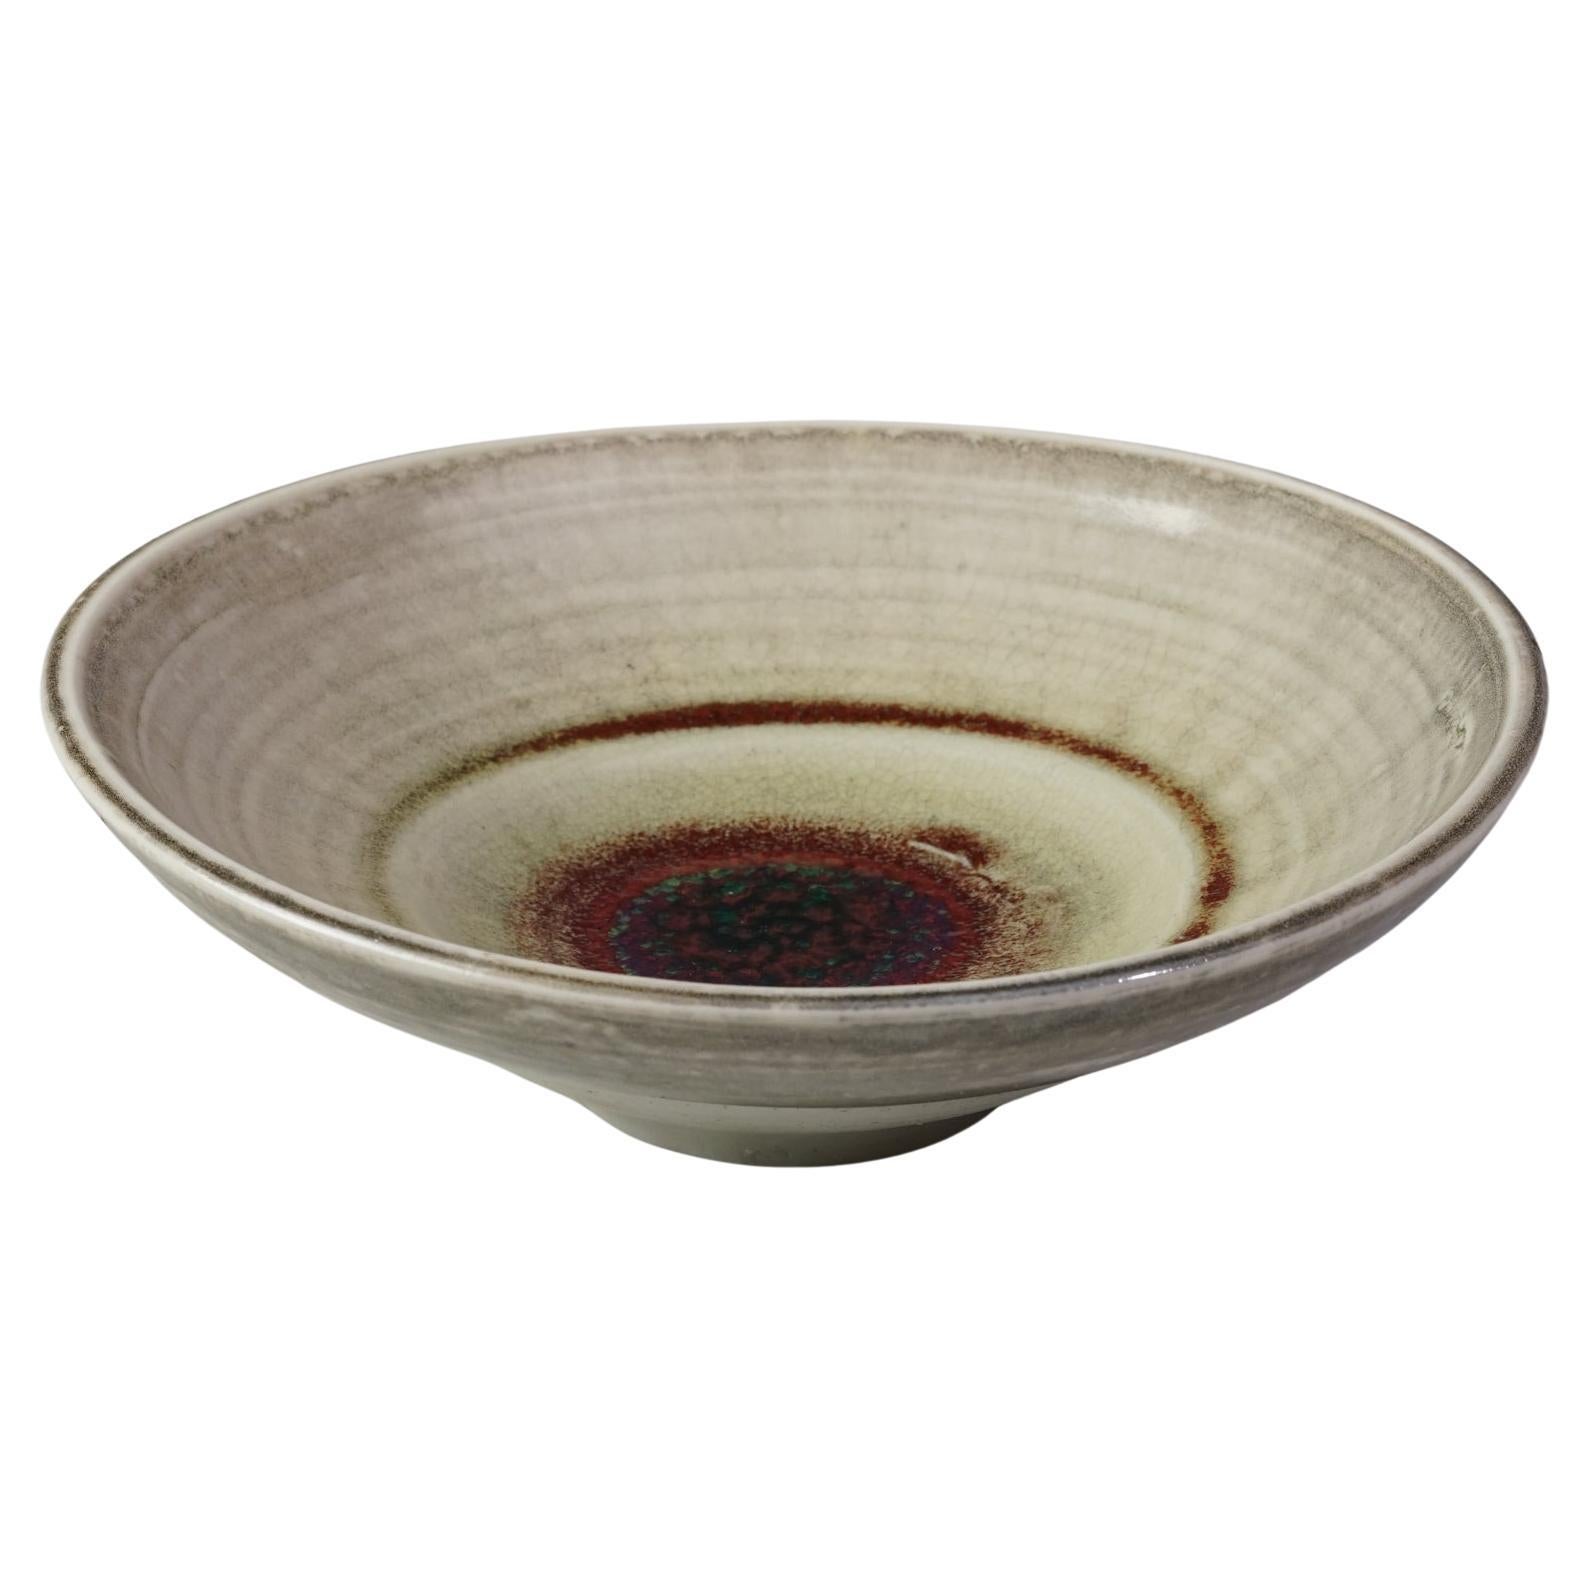 Scandinavian Modern Ceramic Bowl by Aune Siimes for Arabia, 1940s/1950s For Sale